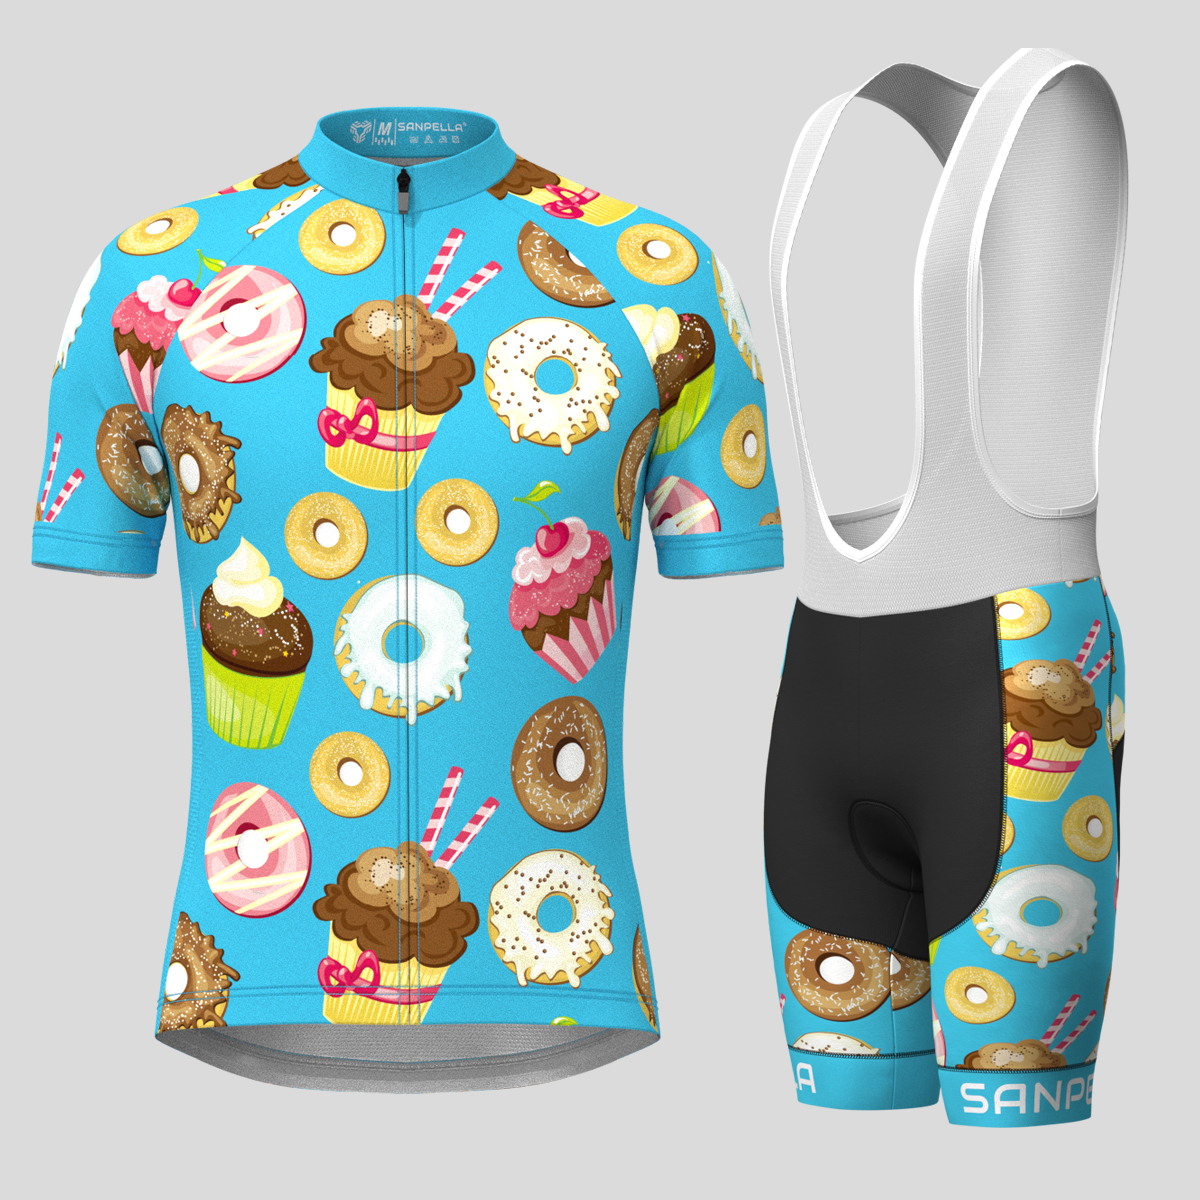 Treat Yourself Sweets Men's Cycling Kit